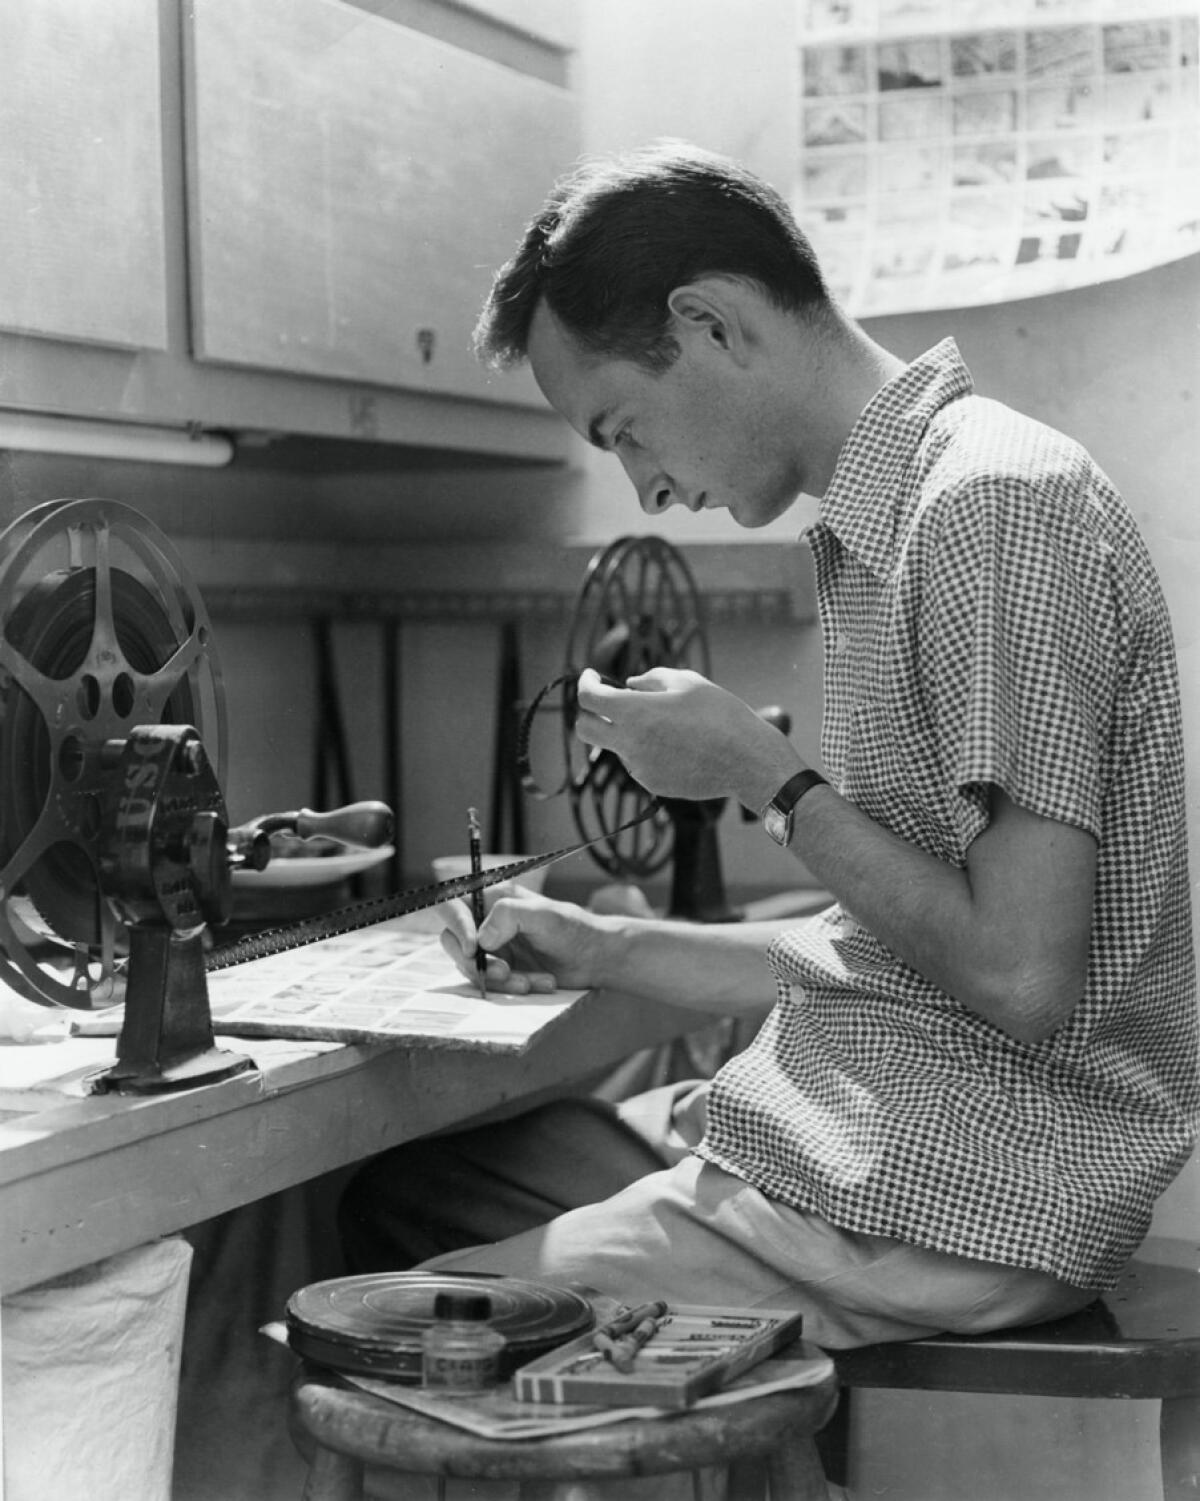 A vintage photo of a young man working with film editing equipment